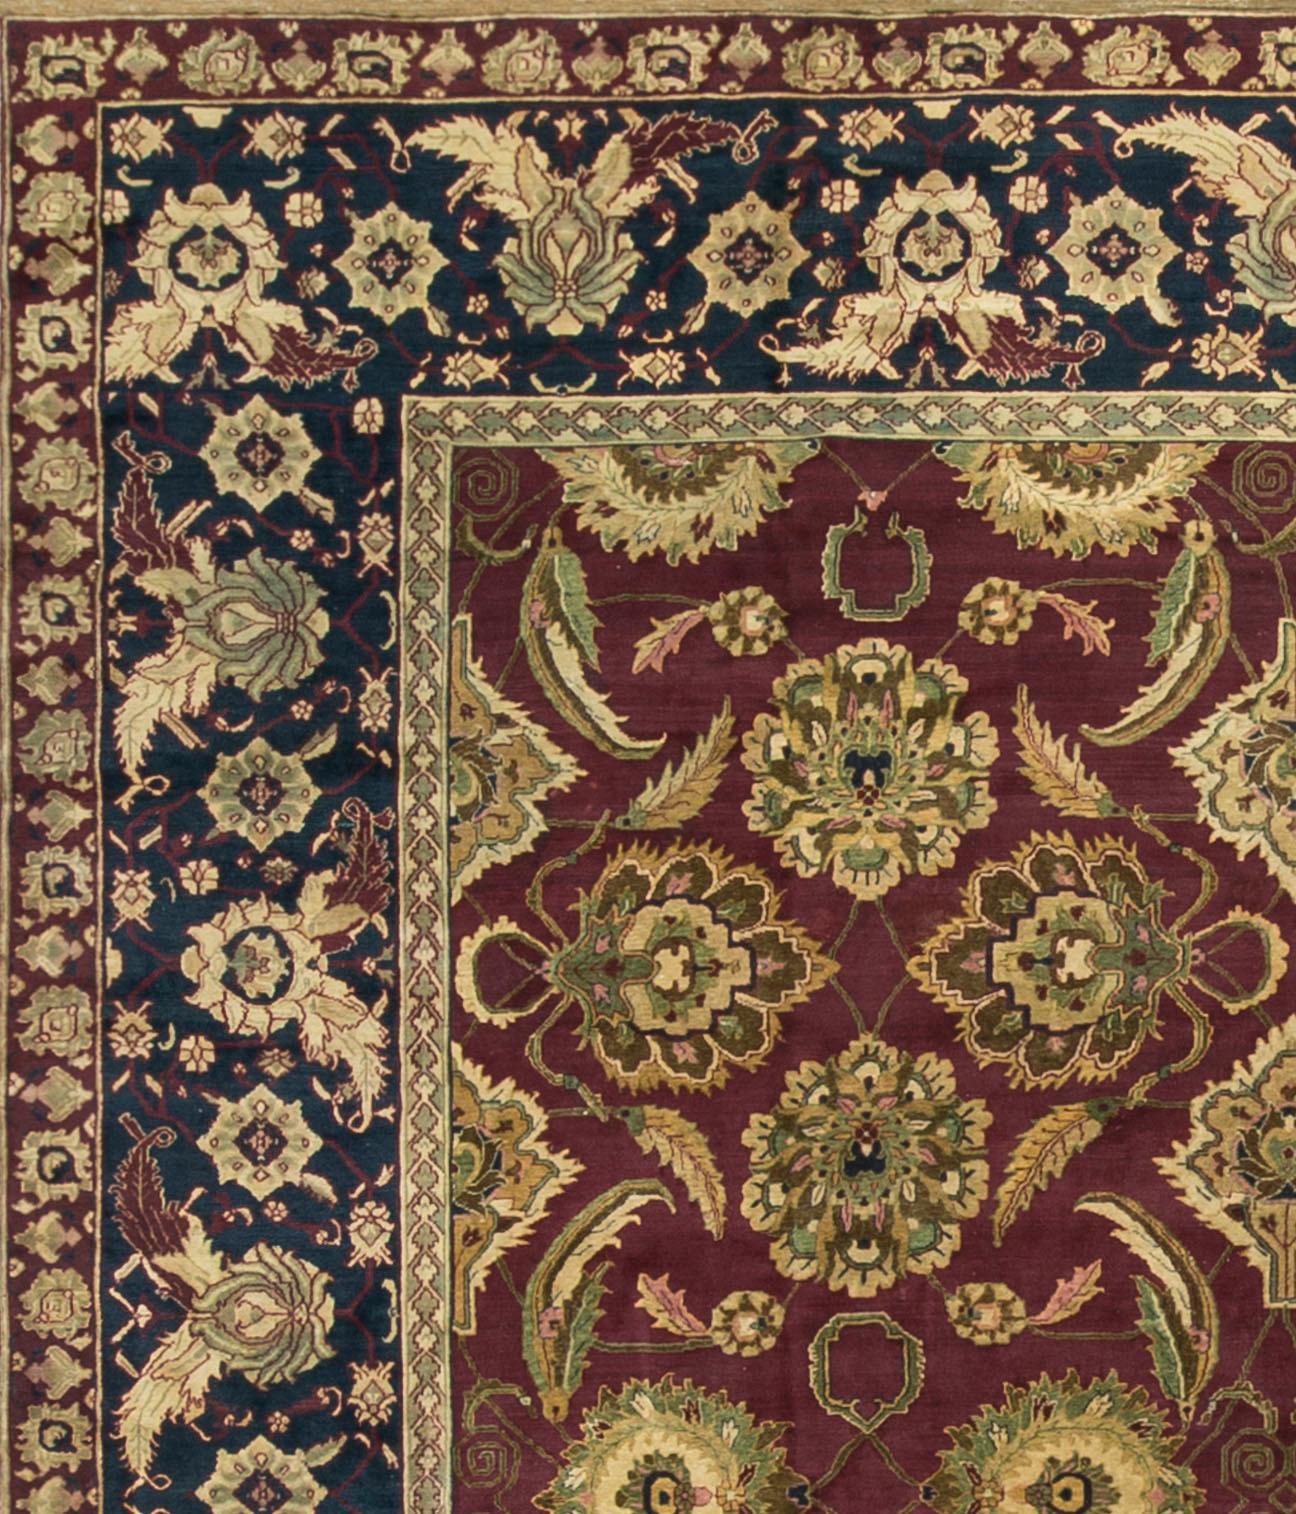 his antique Indian Agra rug, dating back to circa 1890, showcases a distinctive and finely crafted design. Agra rugs are known for their grandeur and often feature bold floral patterns and intricate details. The central field of this rug likely